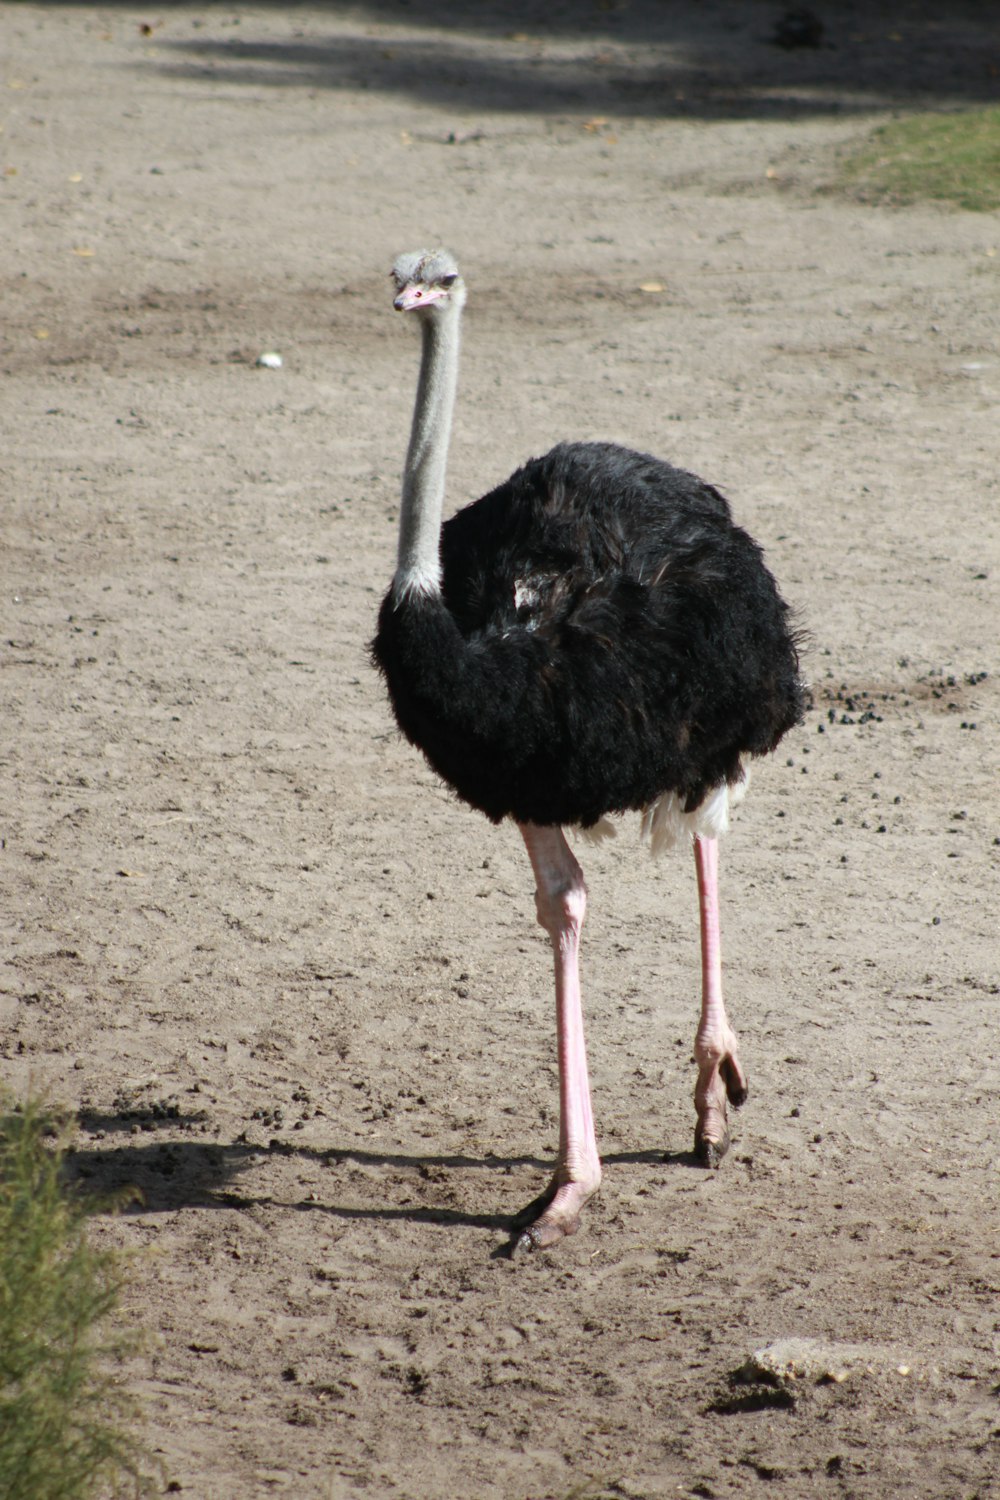 an ostrich is standing in the dirt